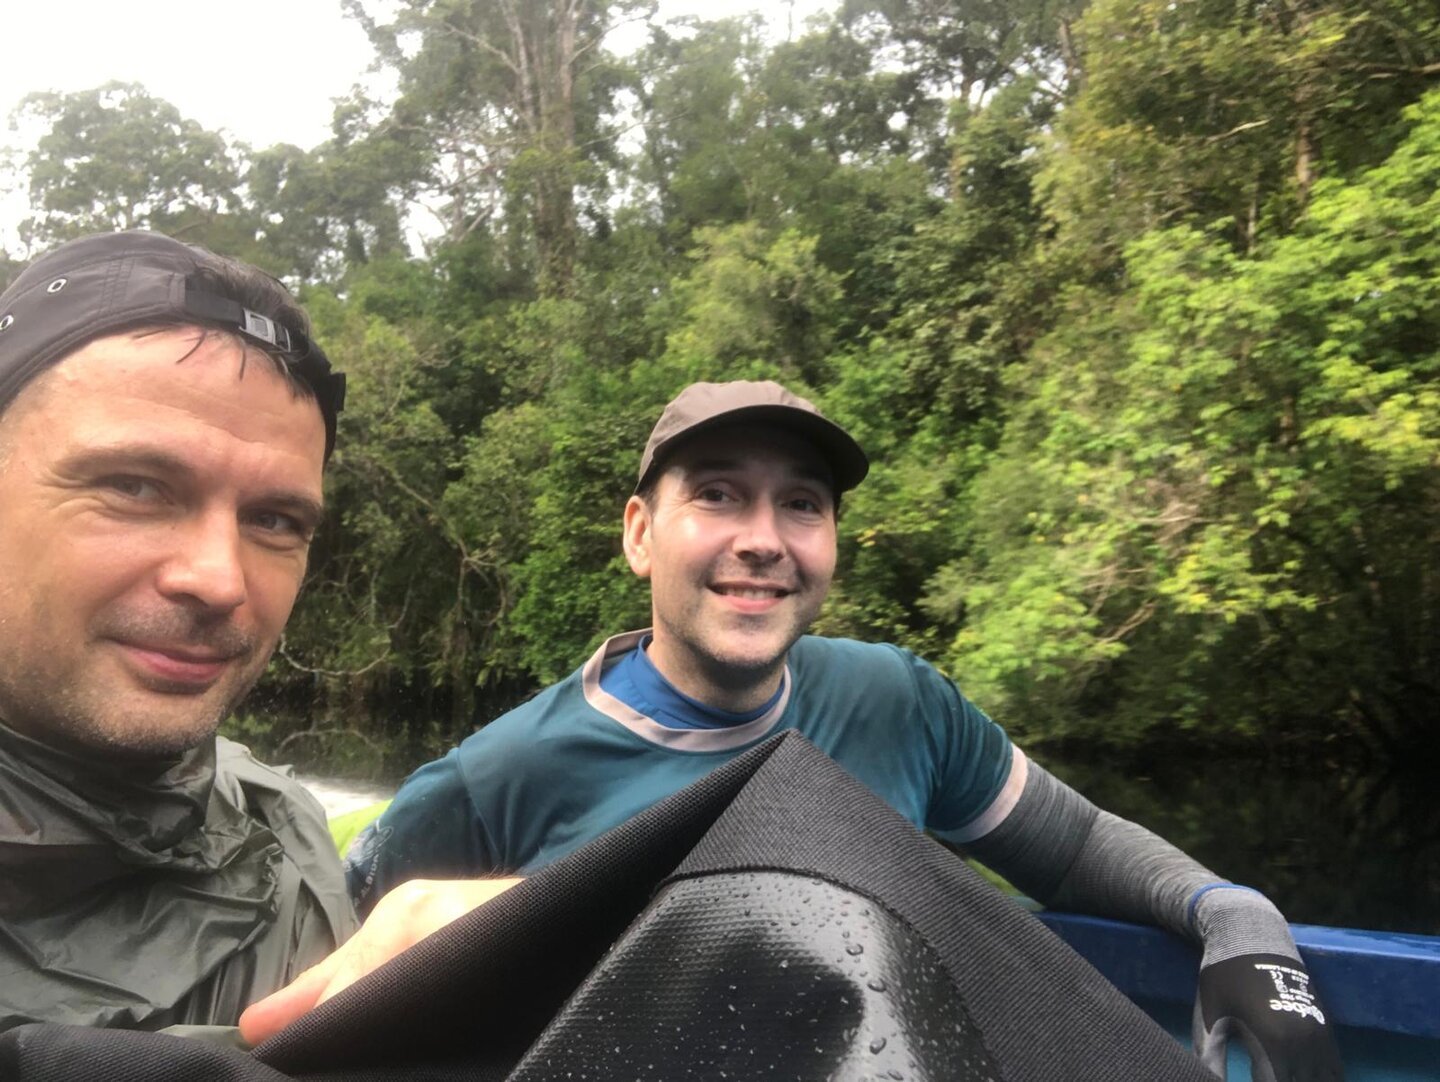 Senior Research Fellow at NTU’s Earth Observatory of Singapore Dr René Dommain and Senior Principal Research Scientist, Singapore-MIT Alliance for Research and Technology Dr Alex Cobb on an expedition to the Mendaram peatland on Borneo Island